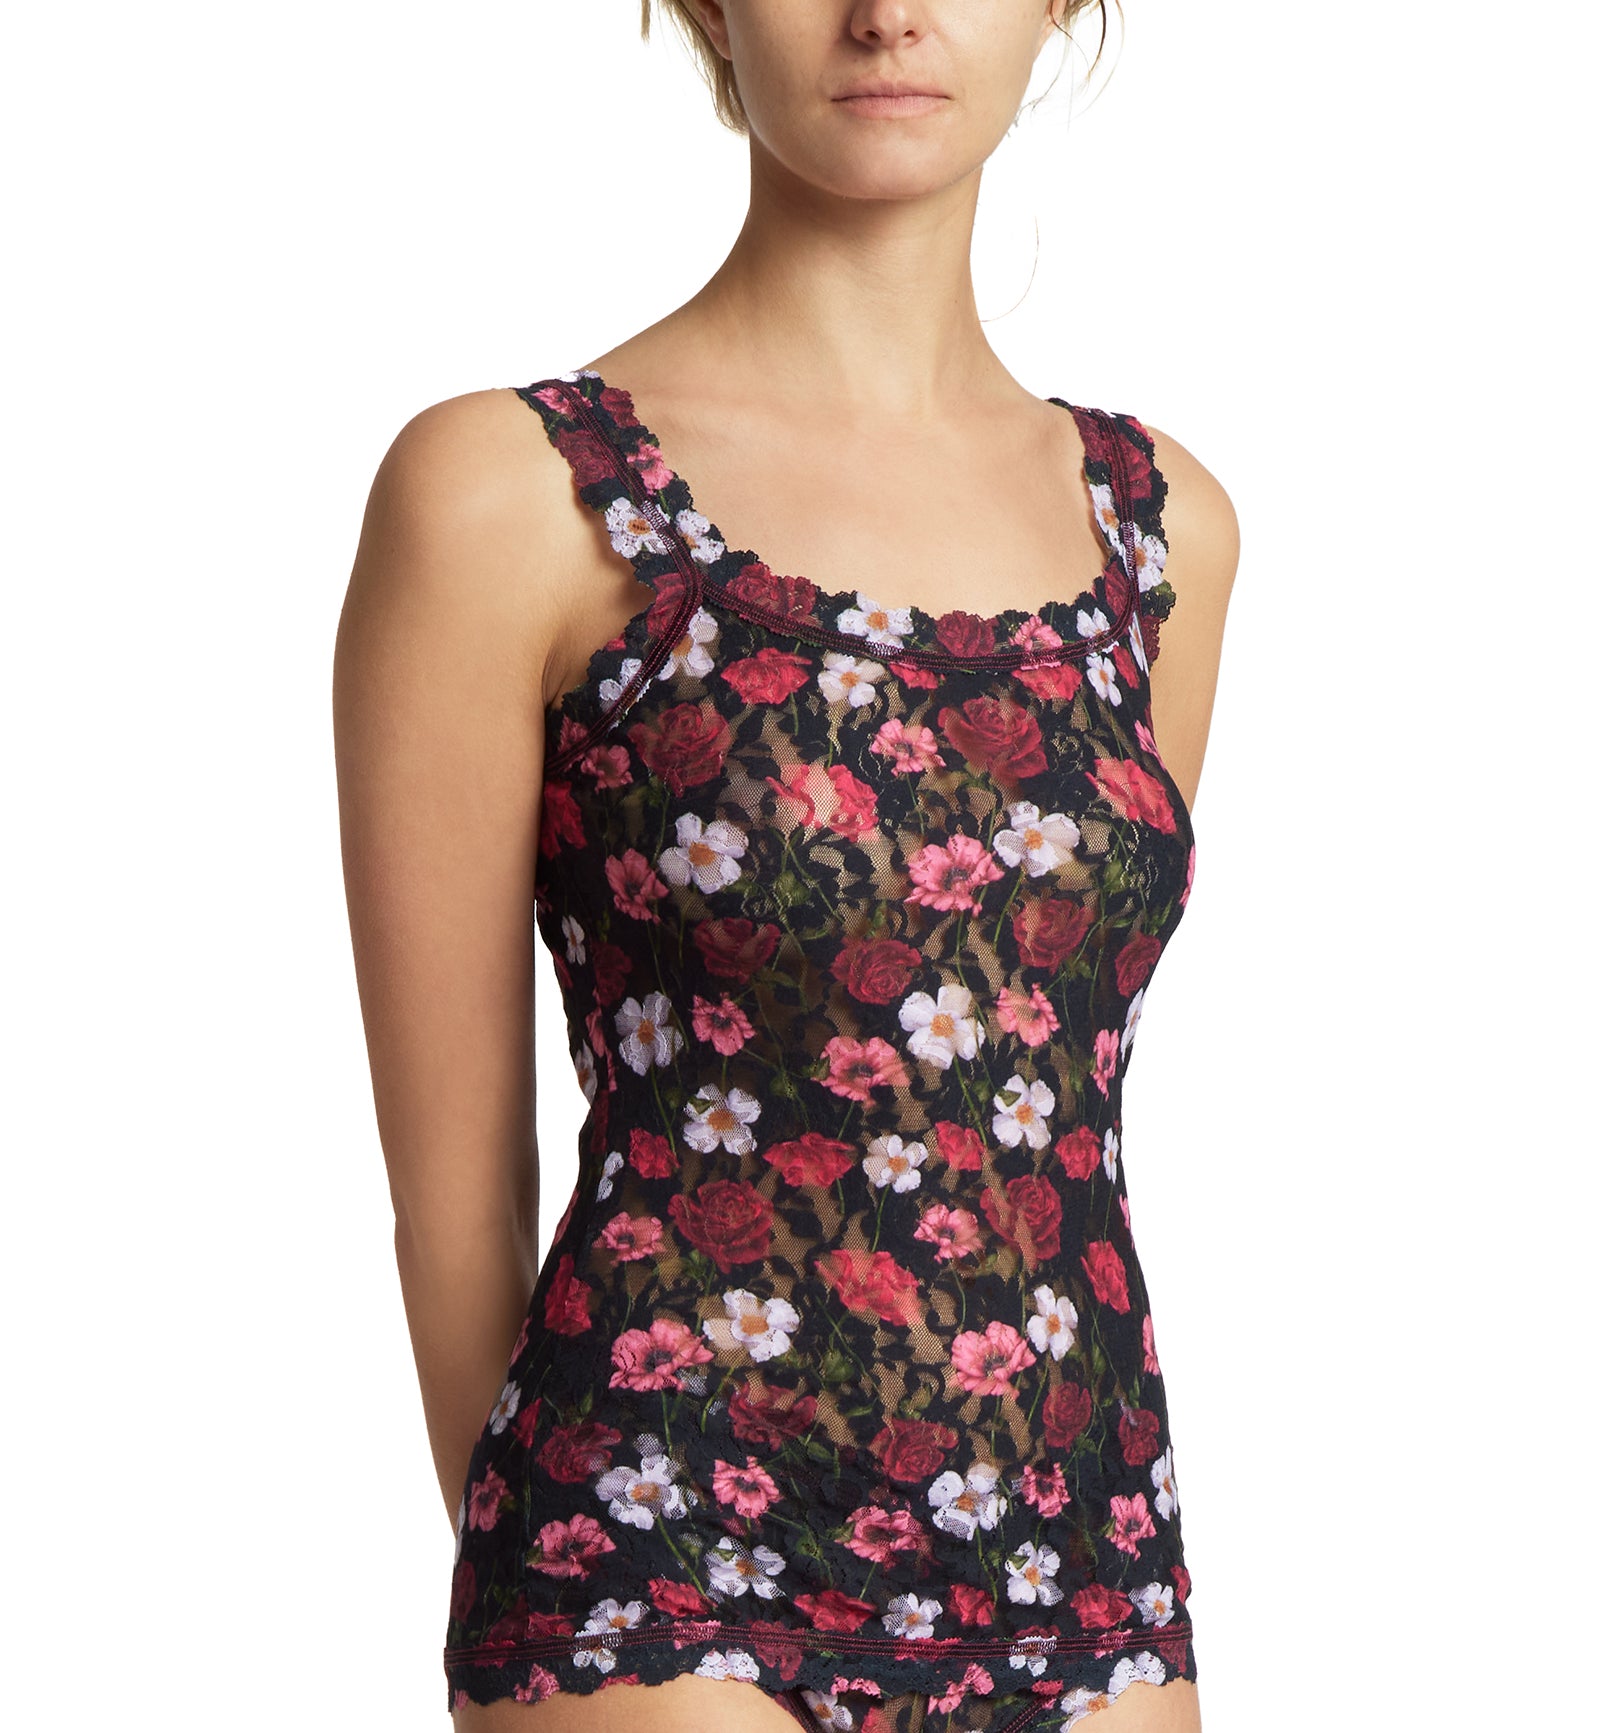 Hanky Panky Signature Lace Printed Unlined Camisole (PR1390L),XS,Am I Dreaming - Am I Dreaming,XS